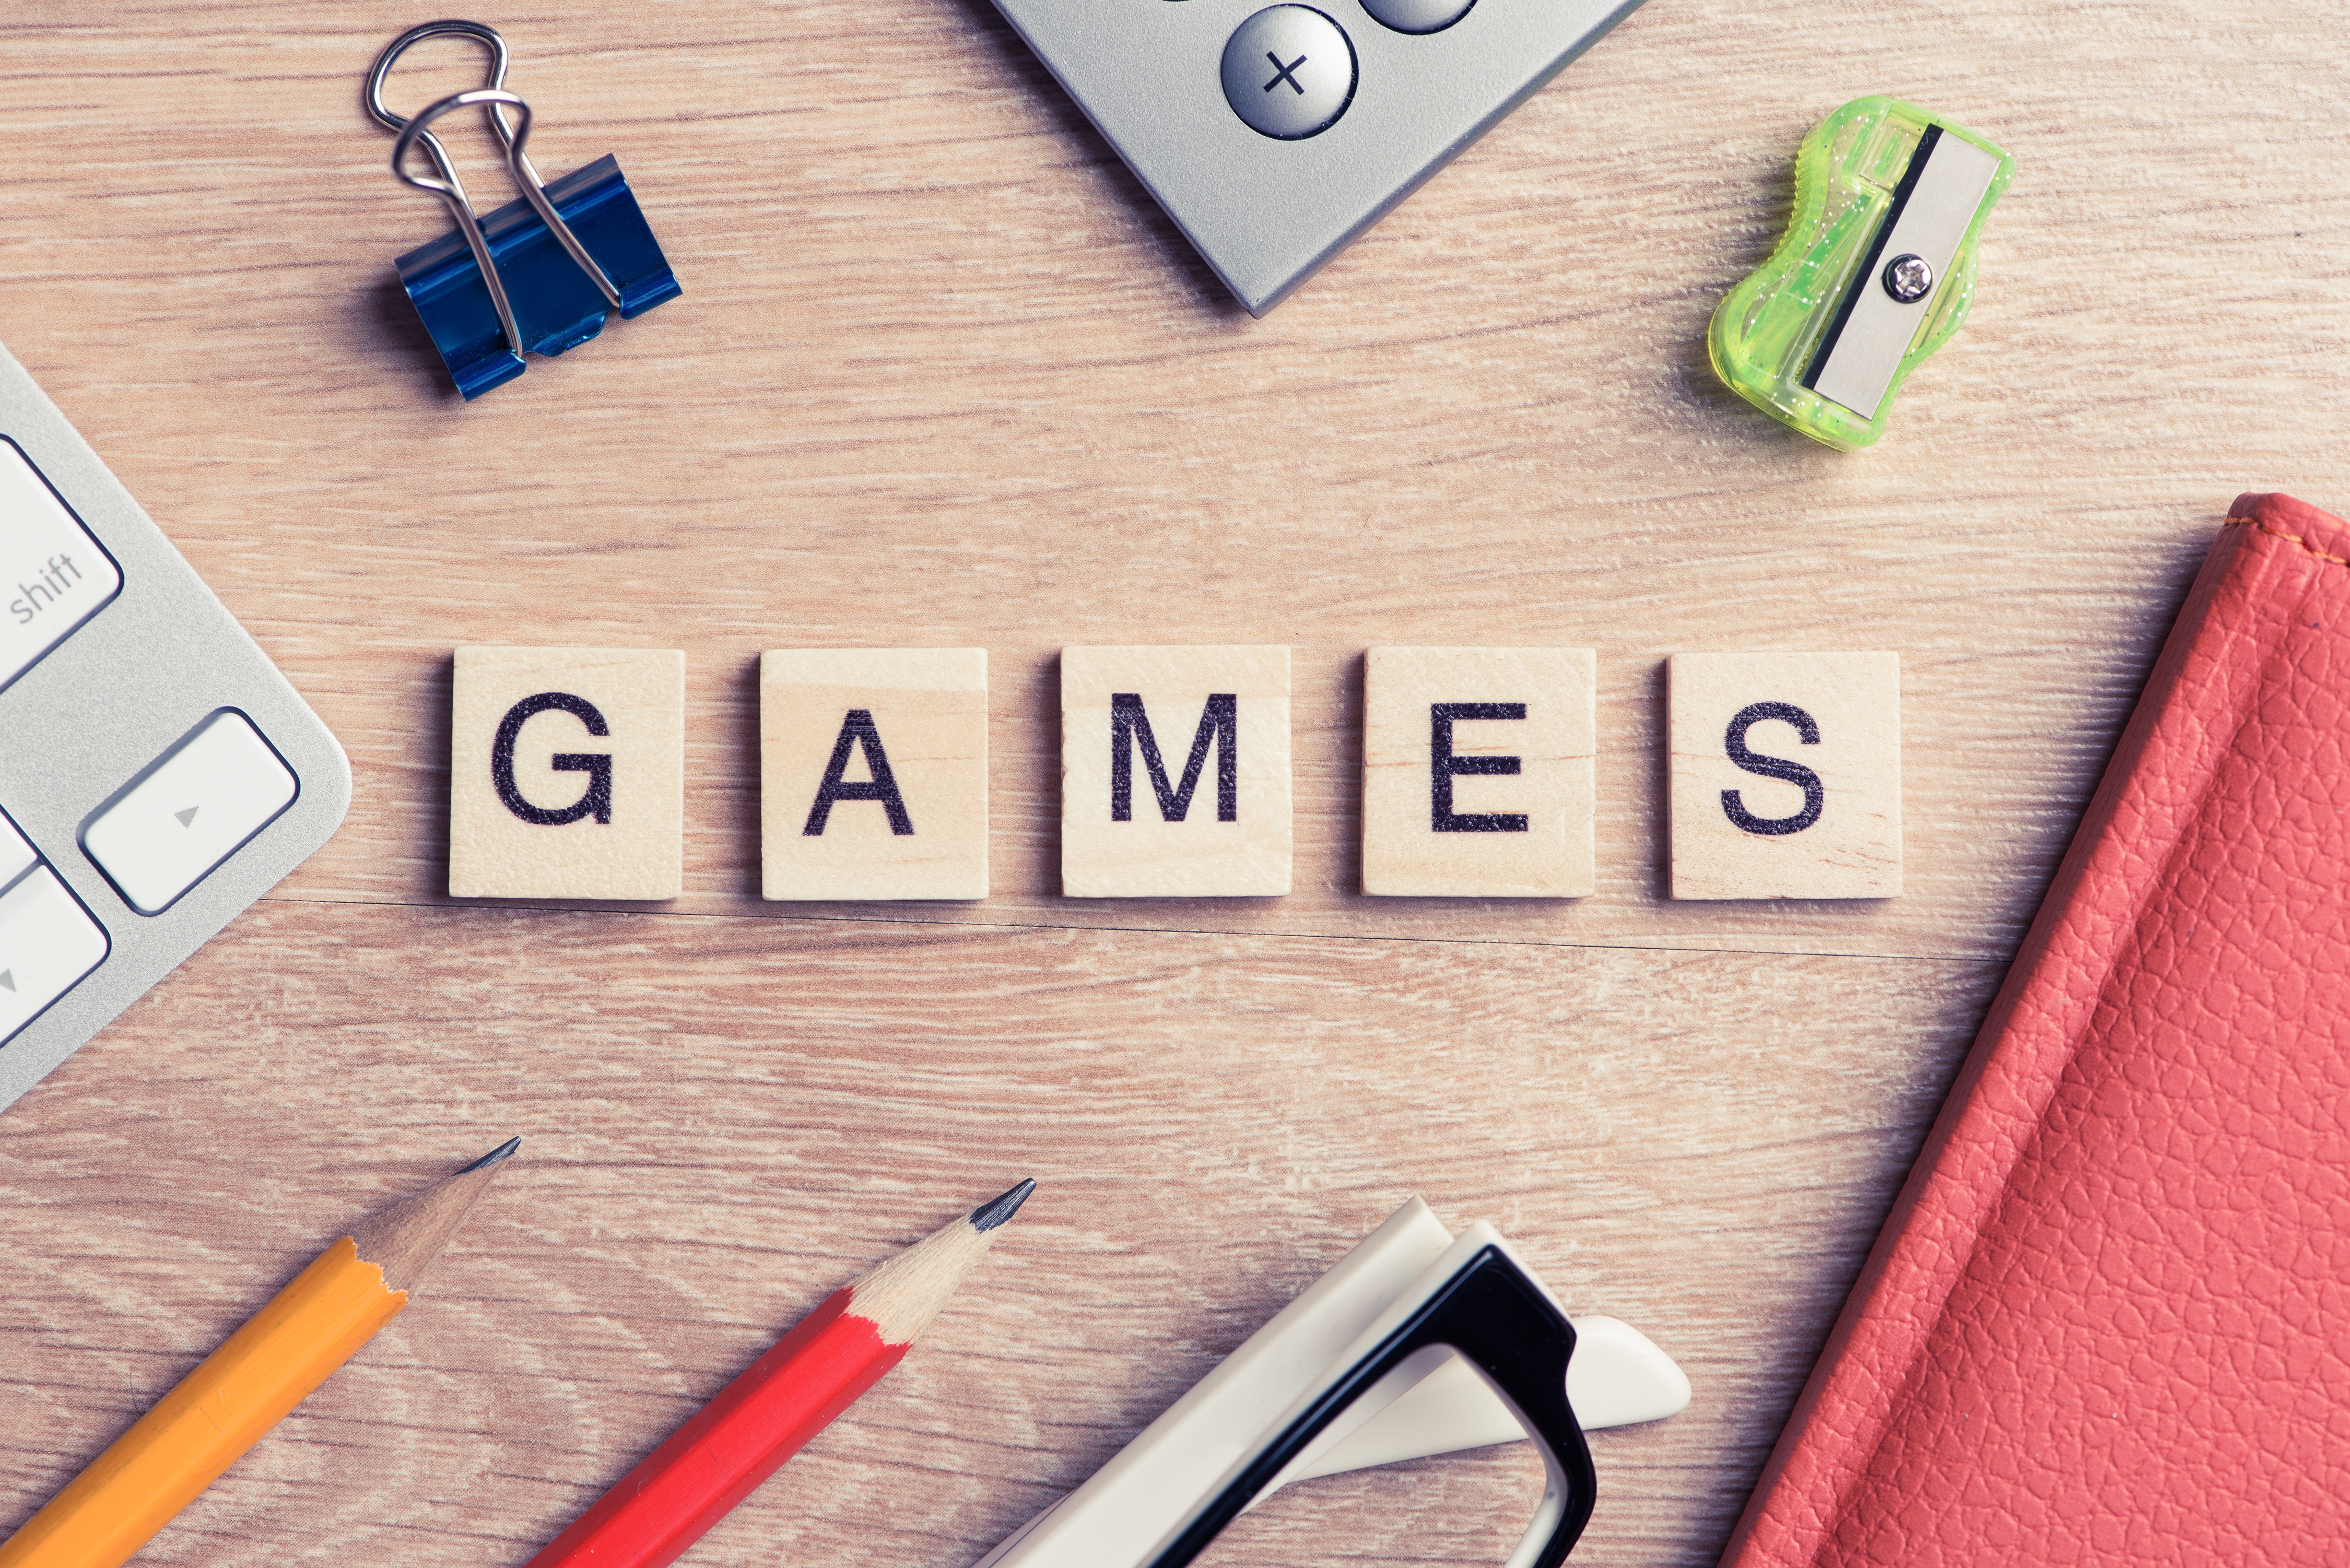 Team-building Games for Your Staff